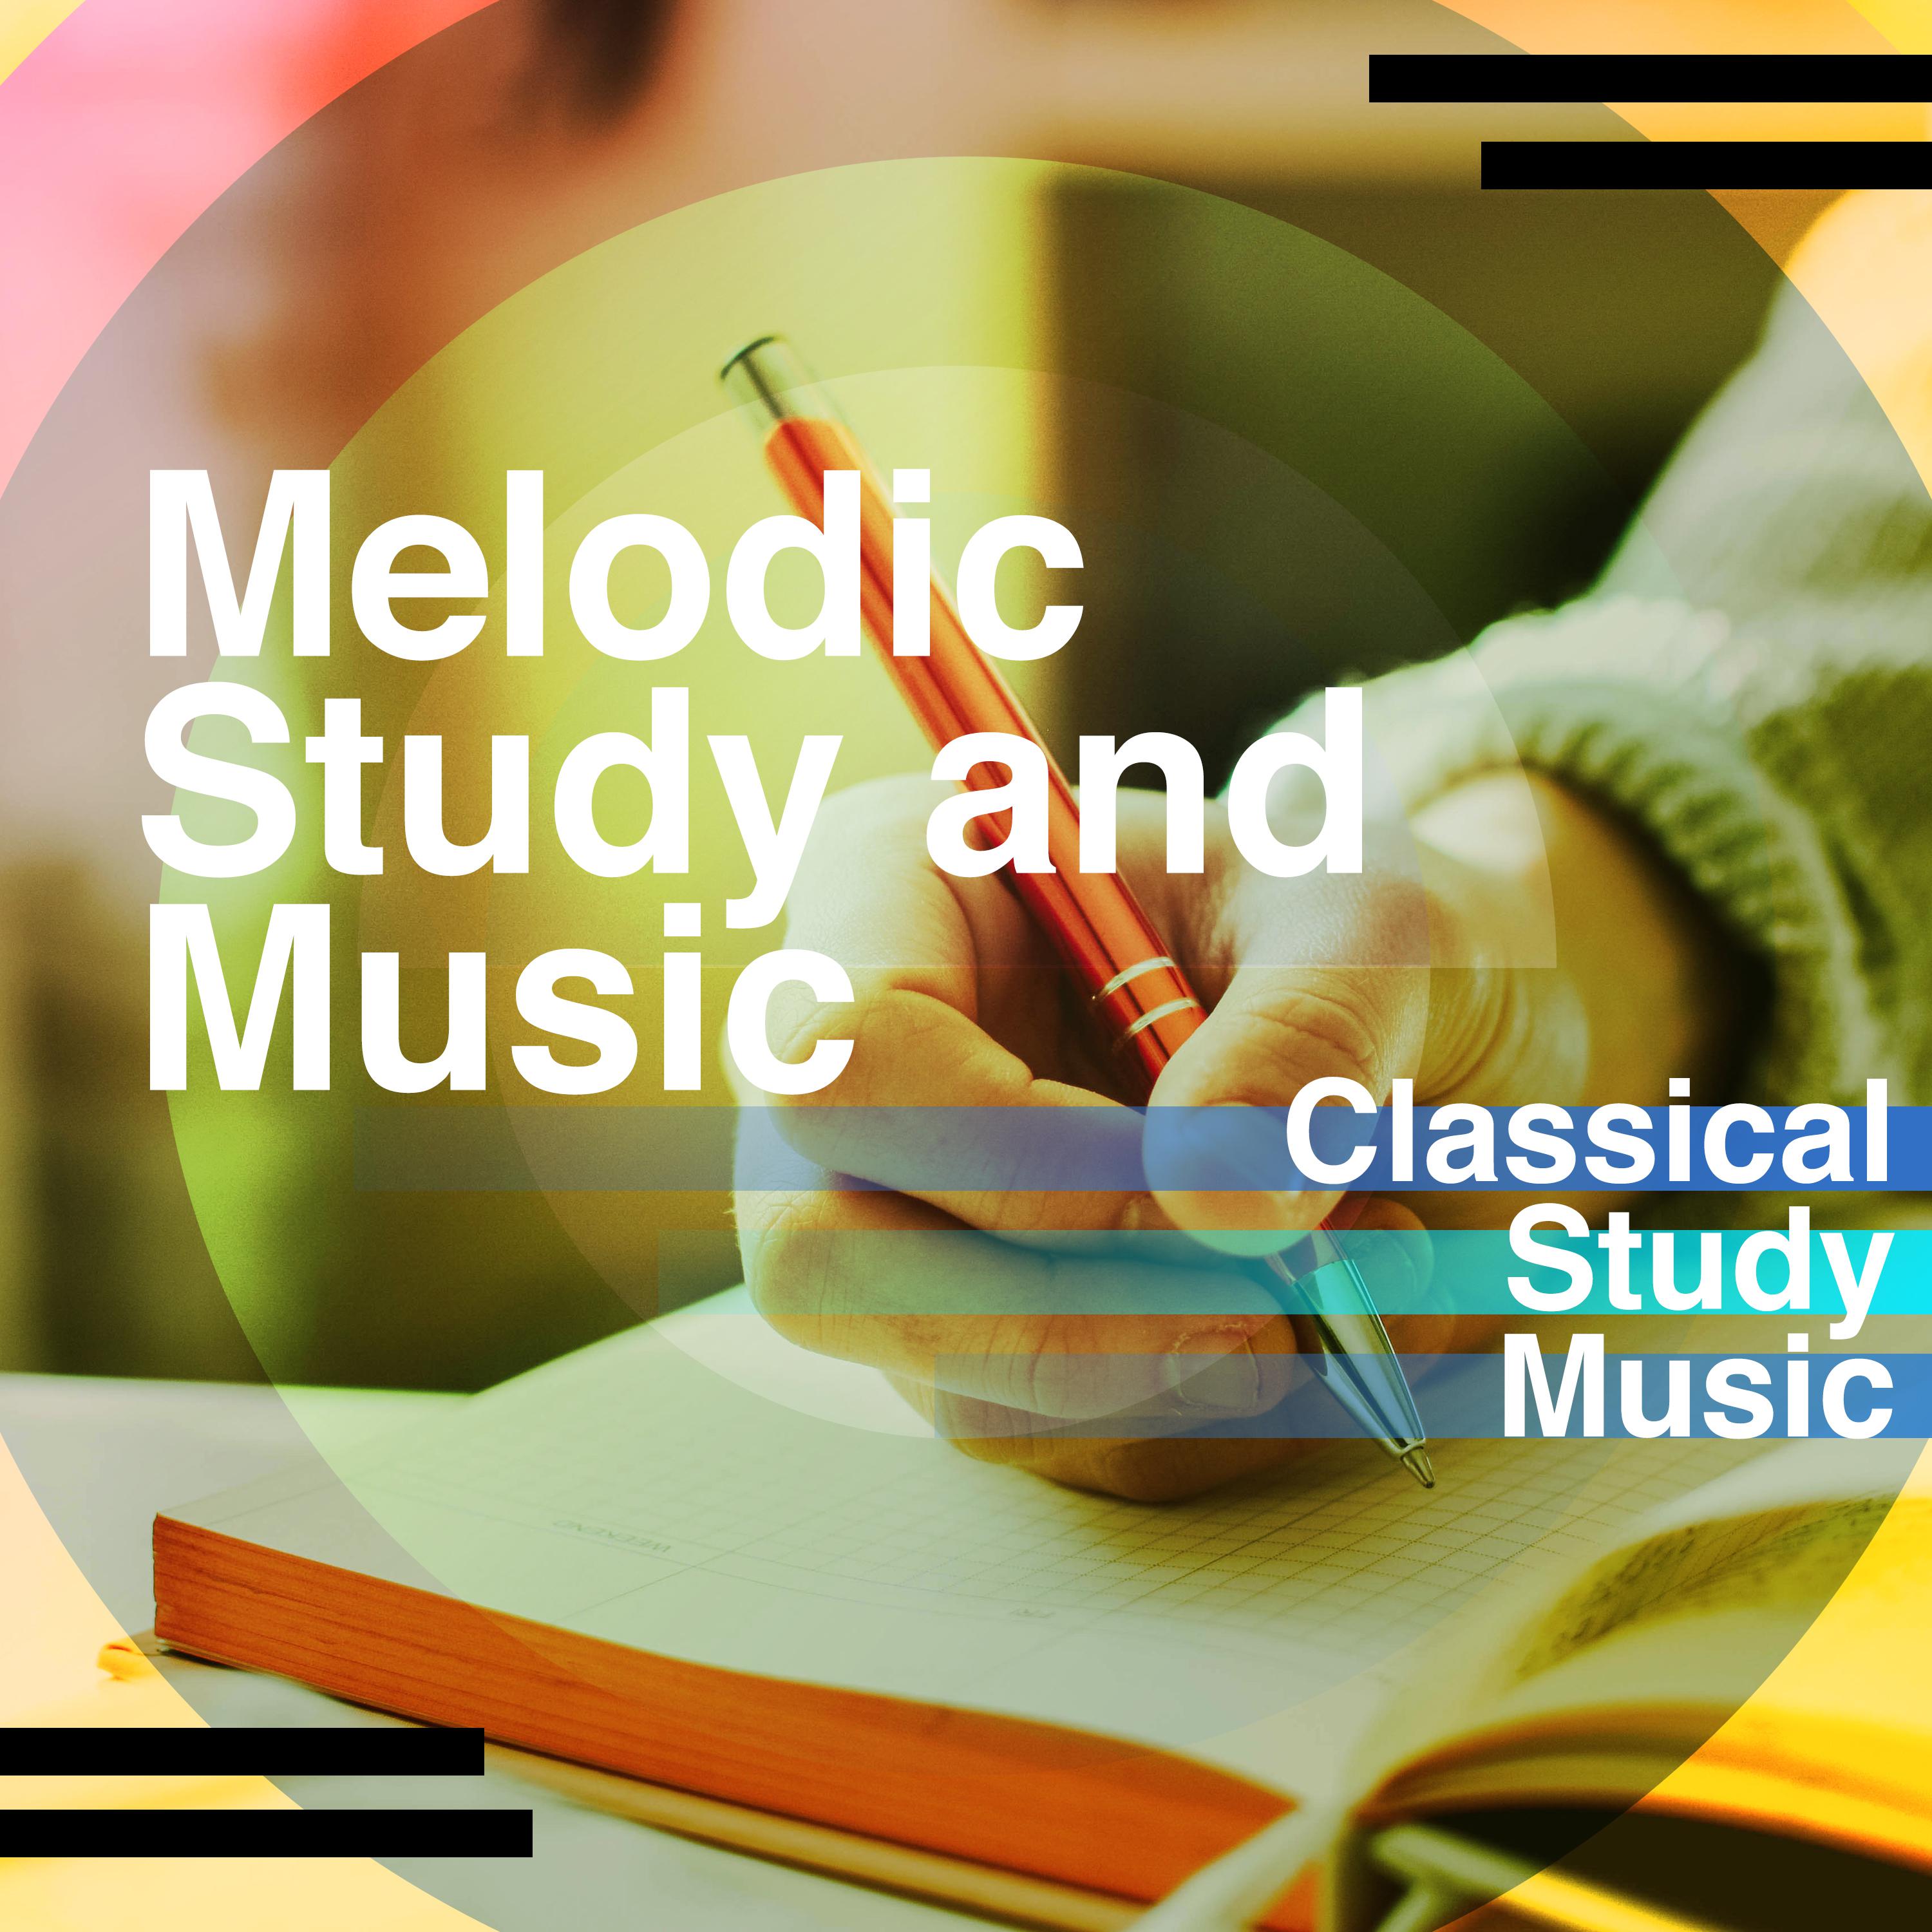 Melodic Study and Music